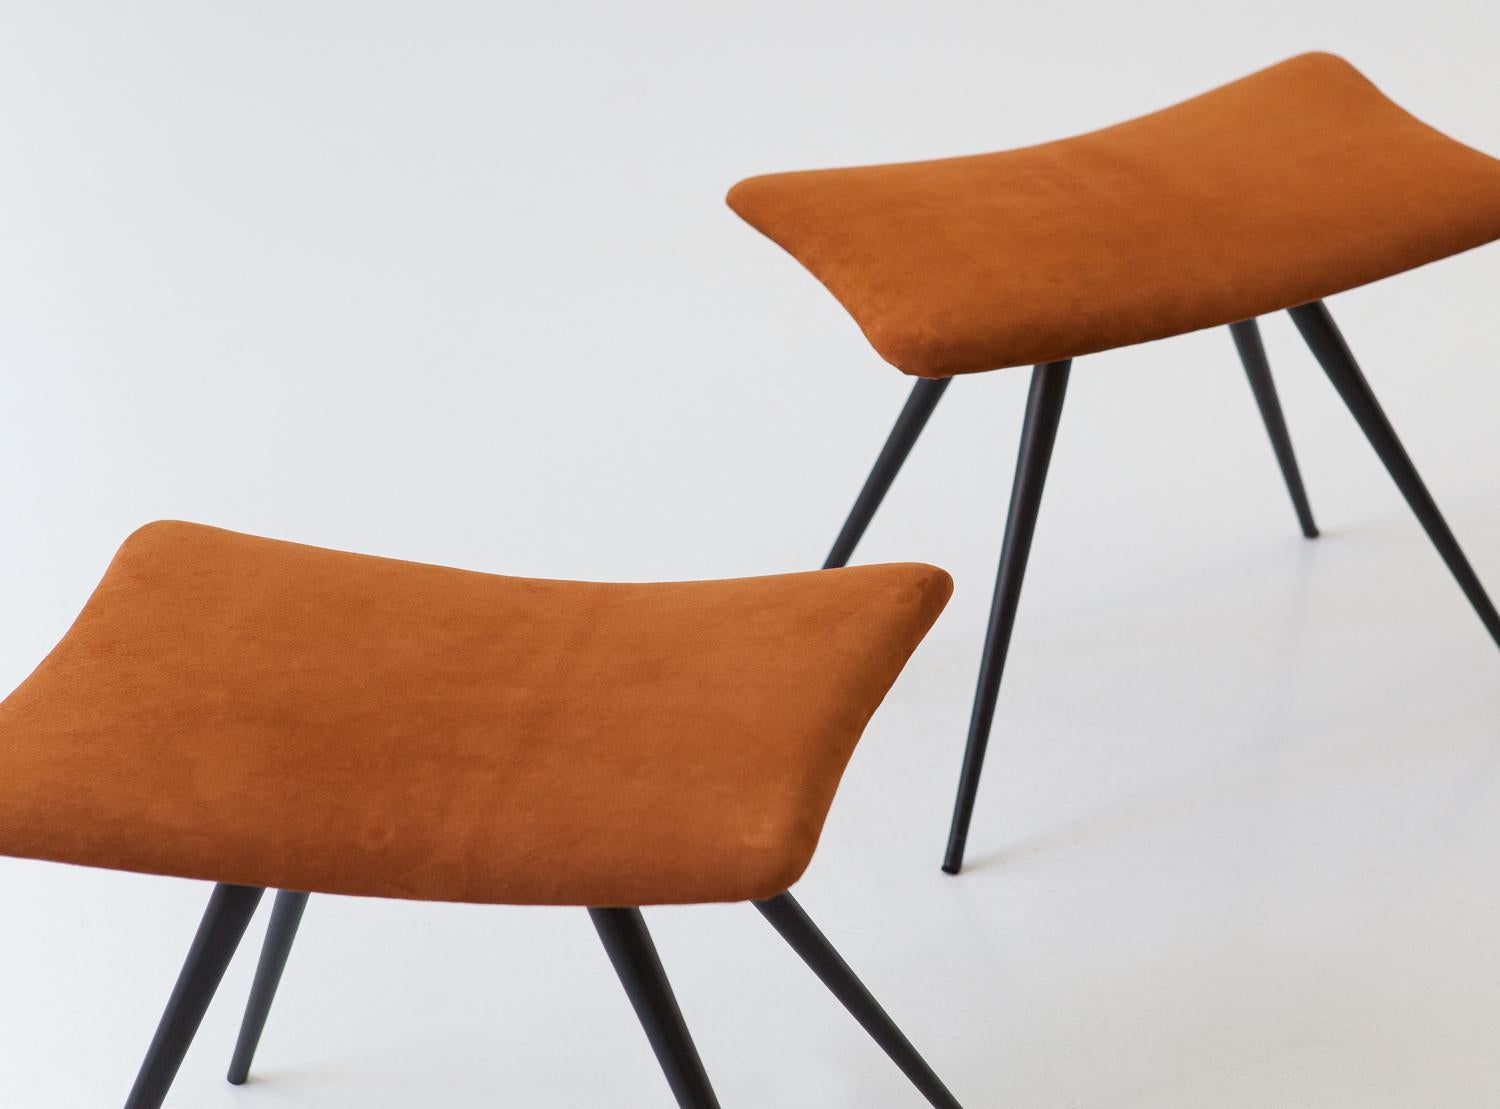 Mid-20th Century Pair of Italian Stools in Cognac Suede Leather And Black Steel Conical Legs